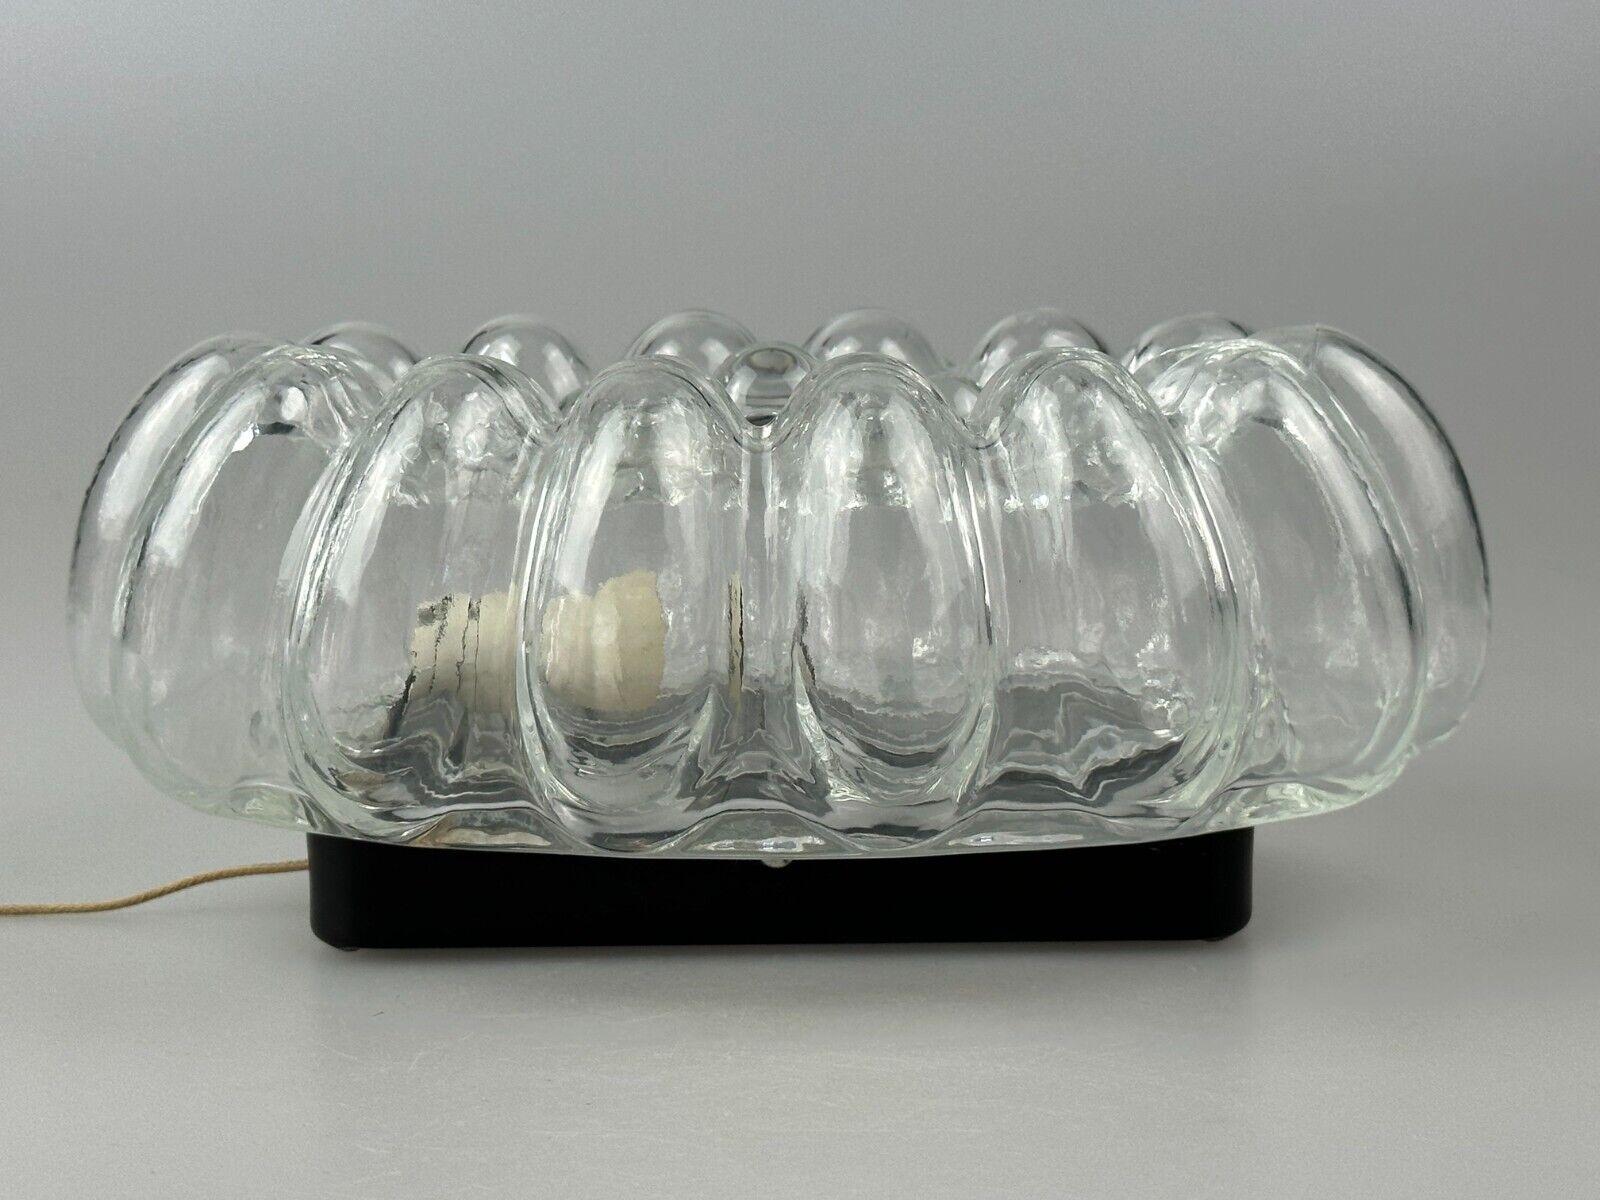 60s 70s wall lamp made of glass & metal bubble wall sconce space age design For Sale 2